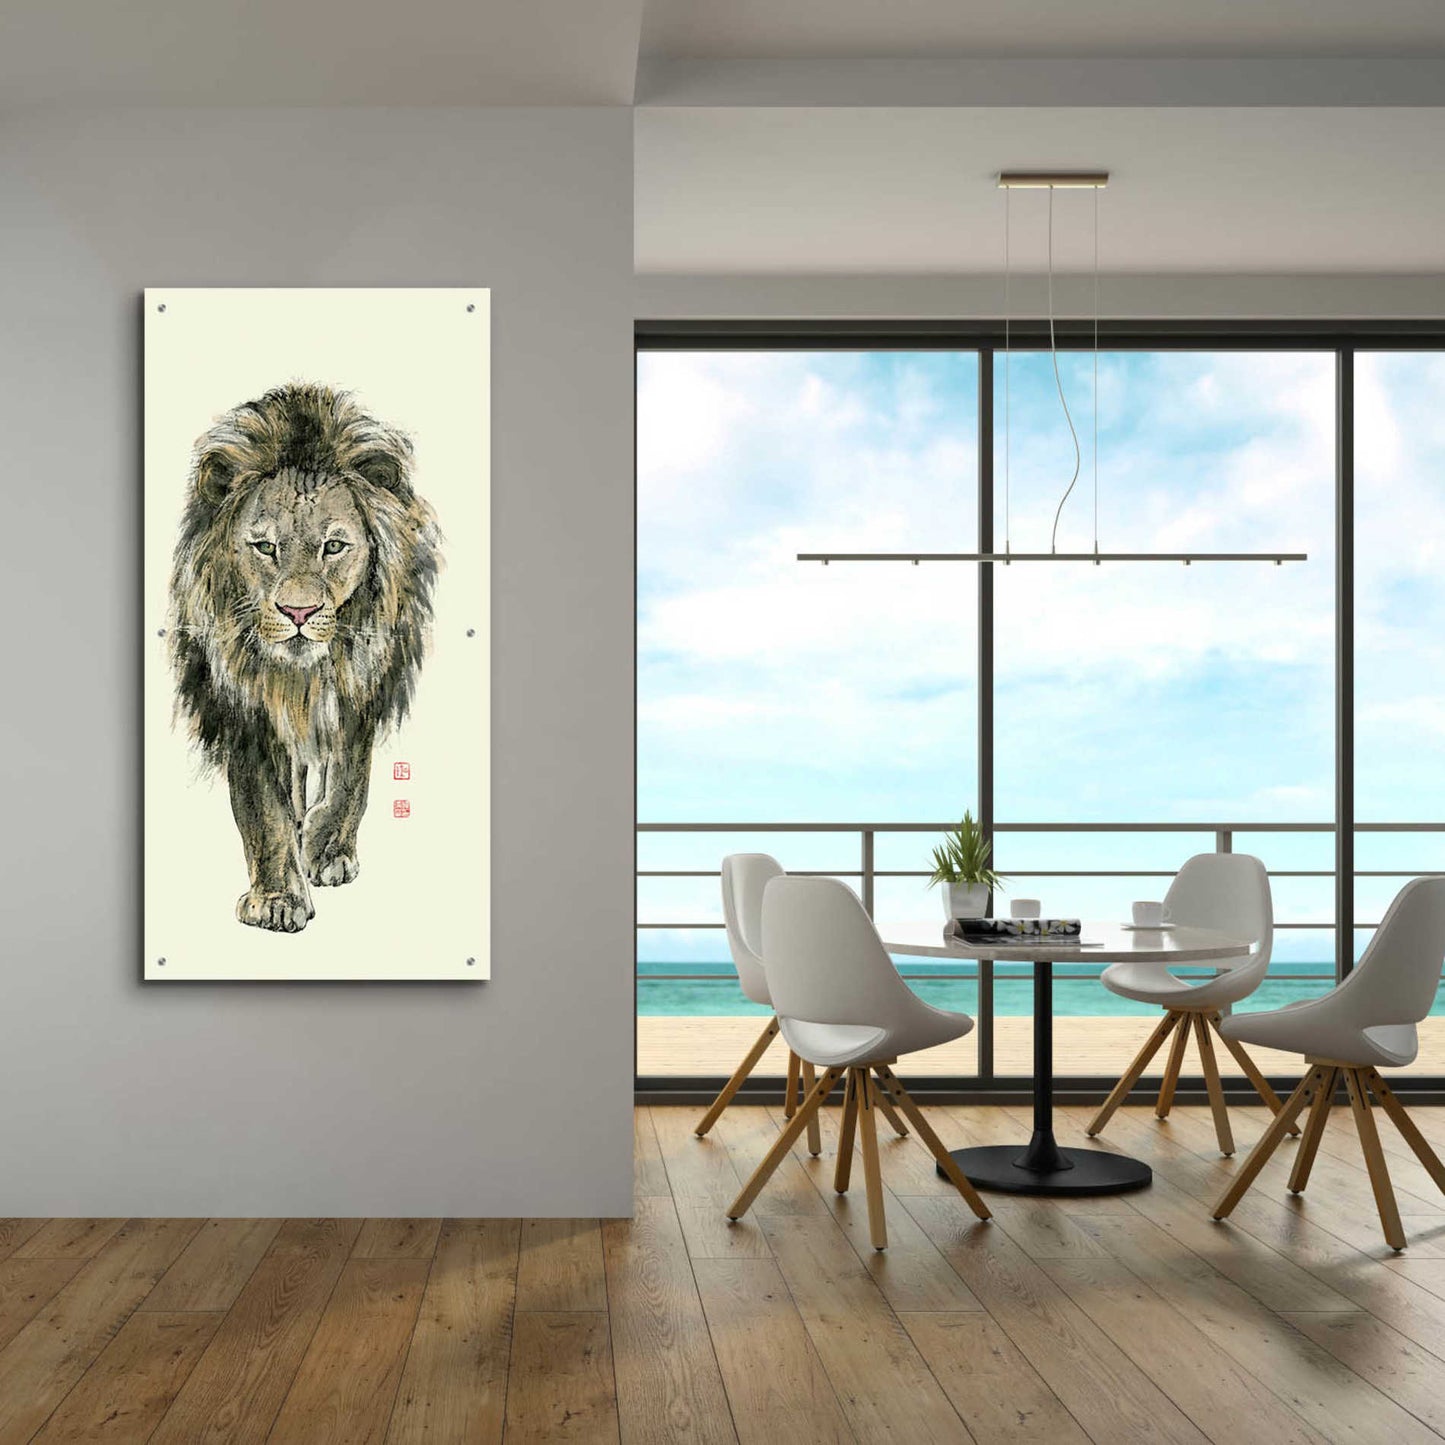 Epic Art 'Majestic King of the Jungle' by River Han, Acrylic Glass Wall Art,24x48